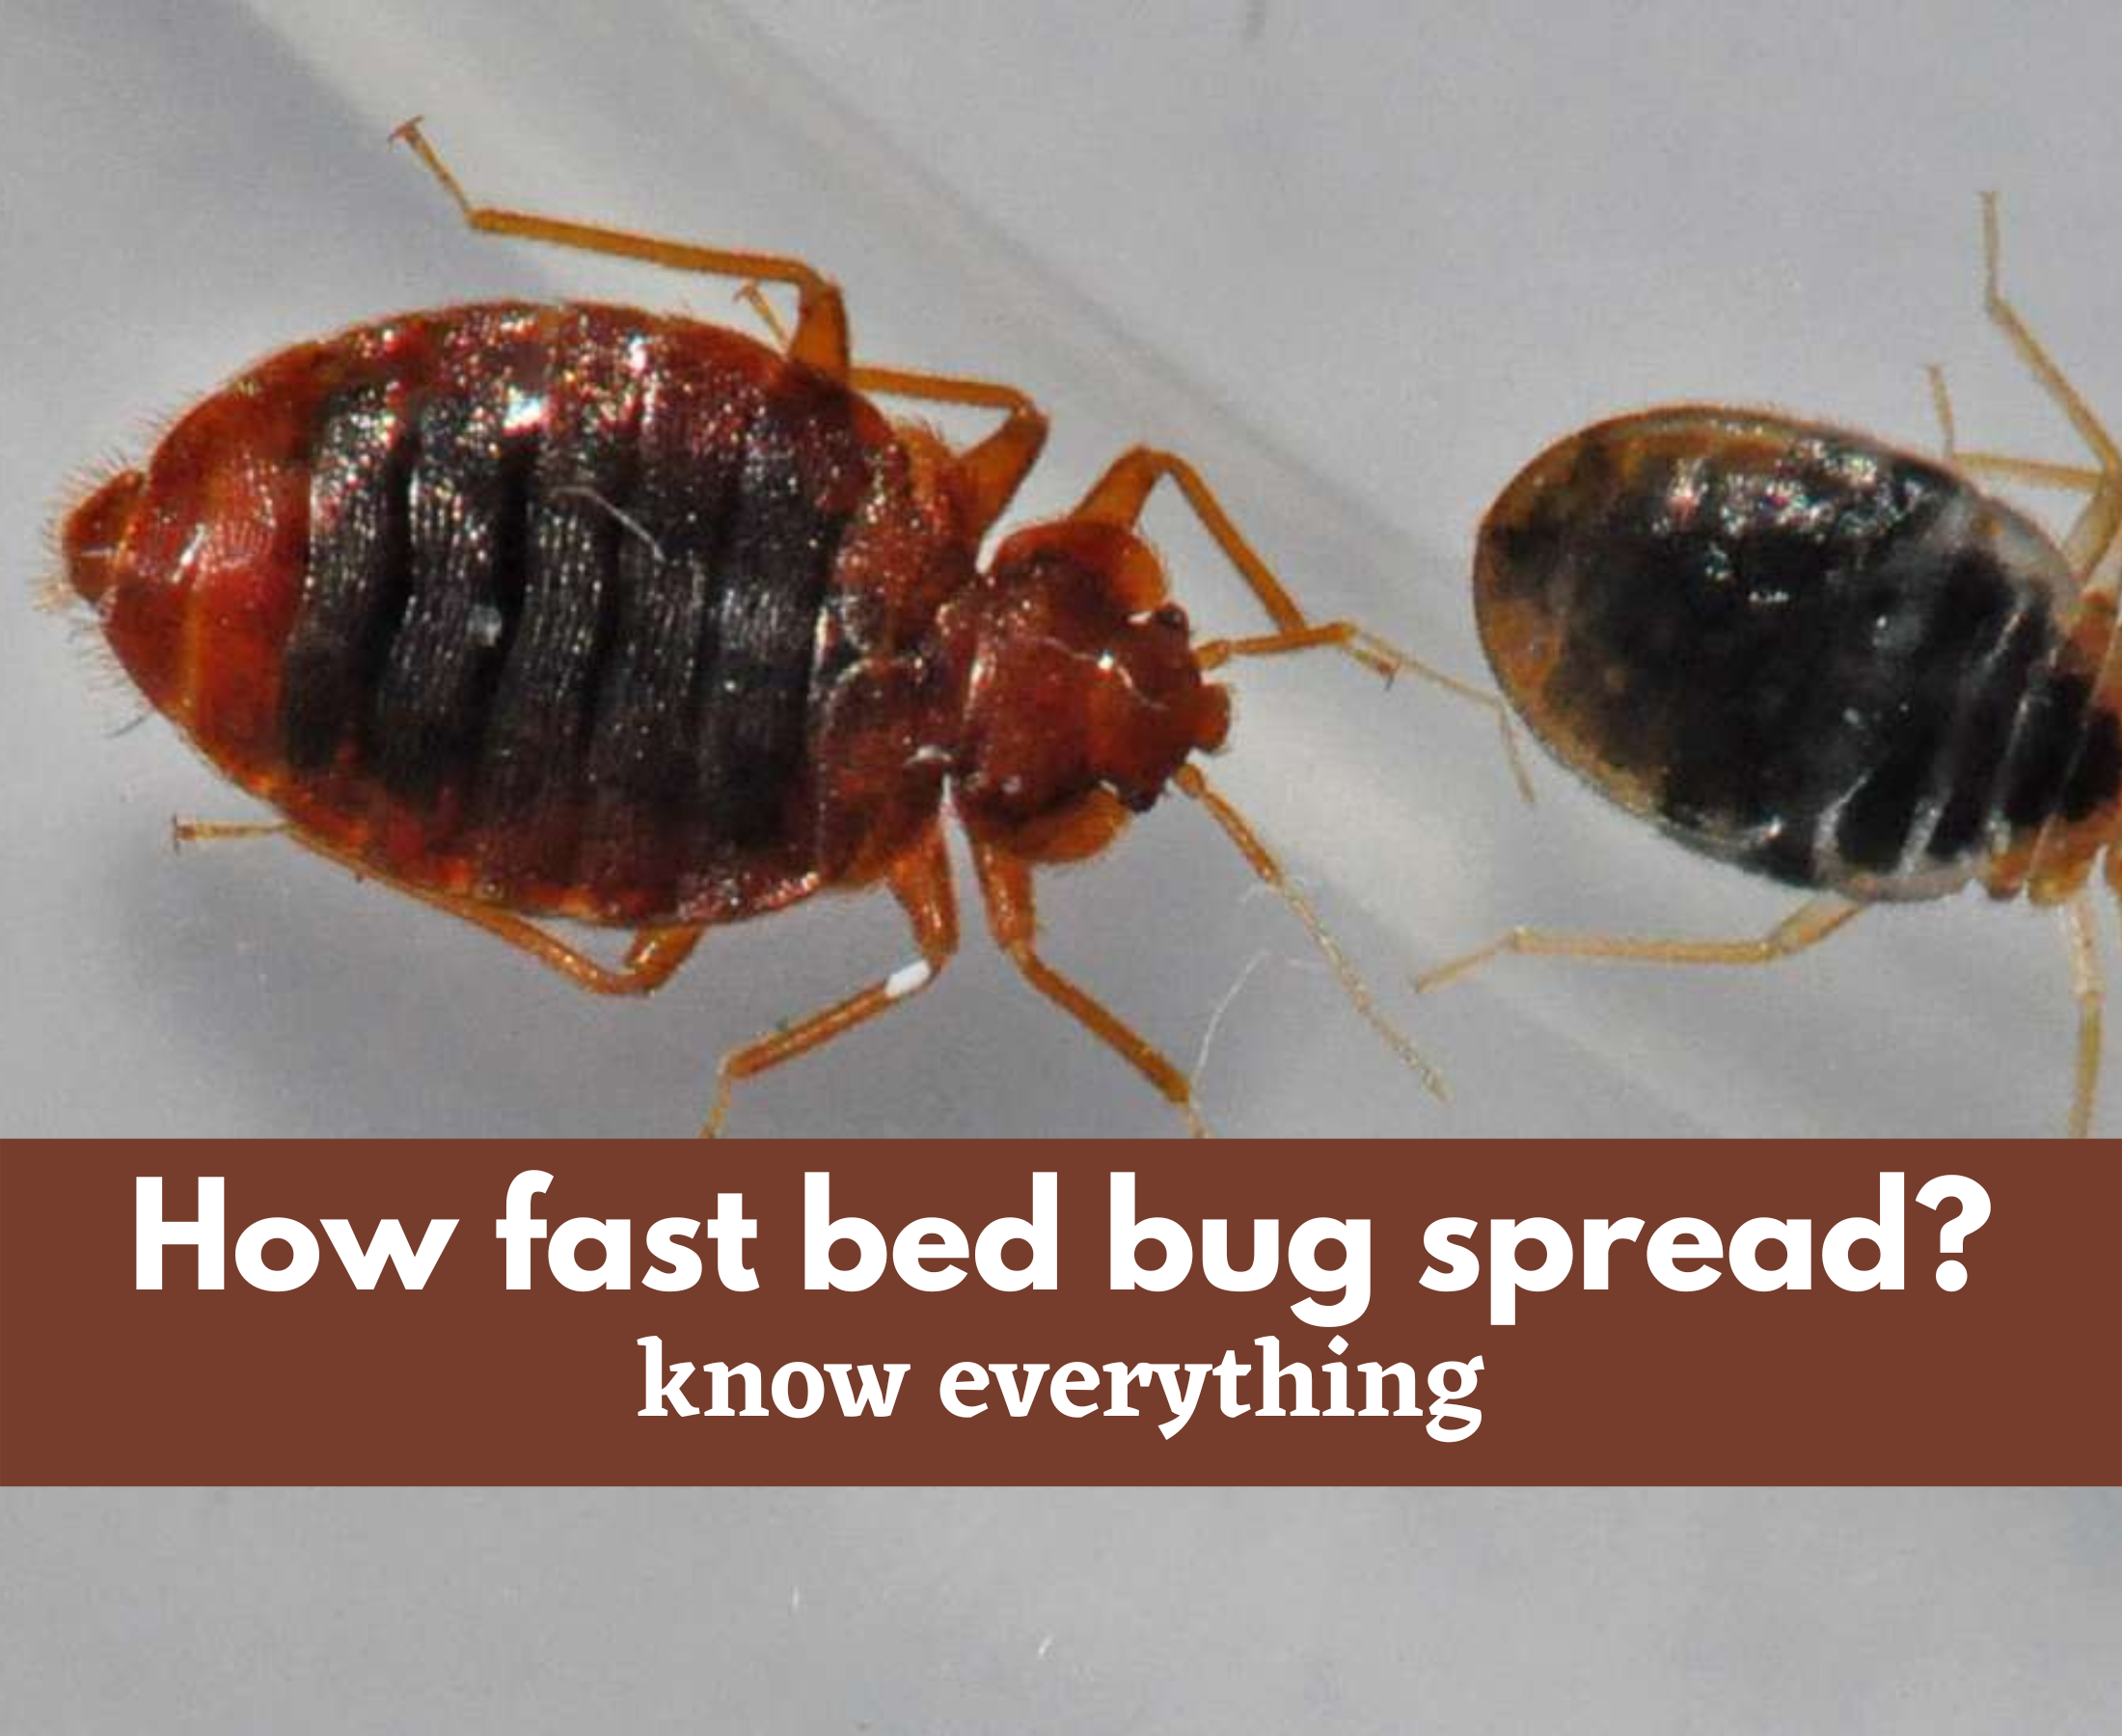 How fast do bed bugs spread?